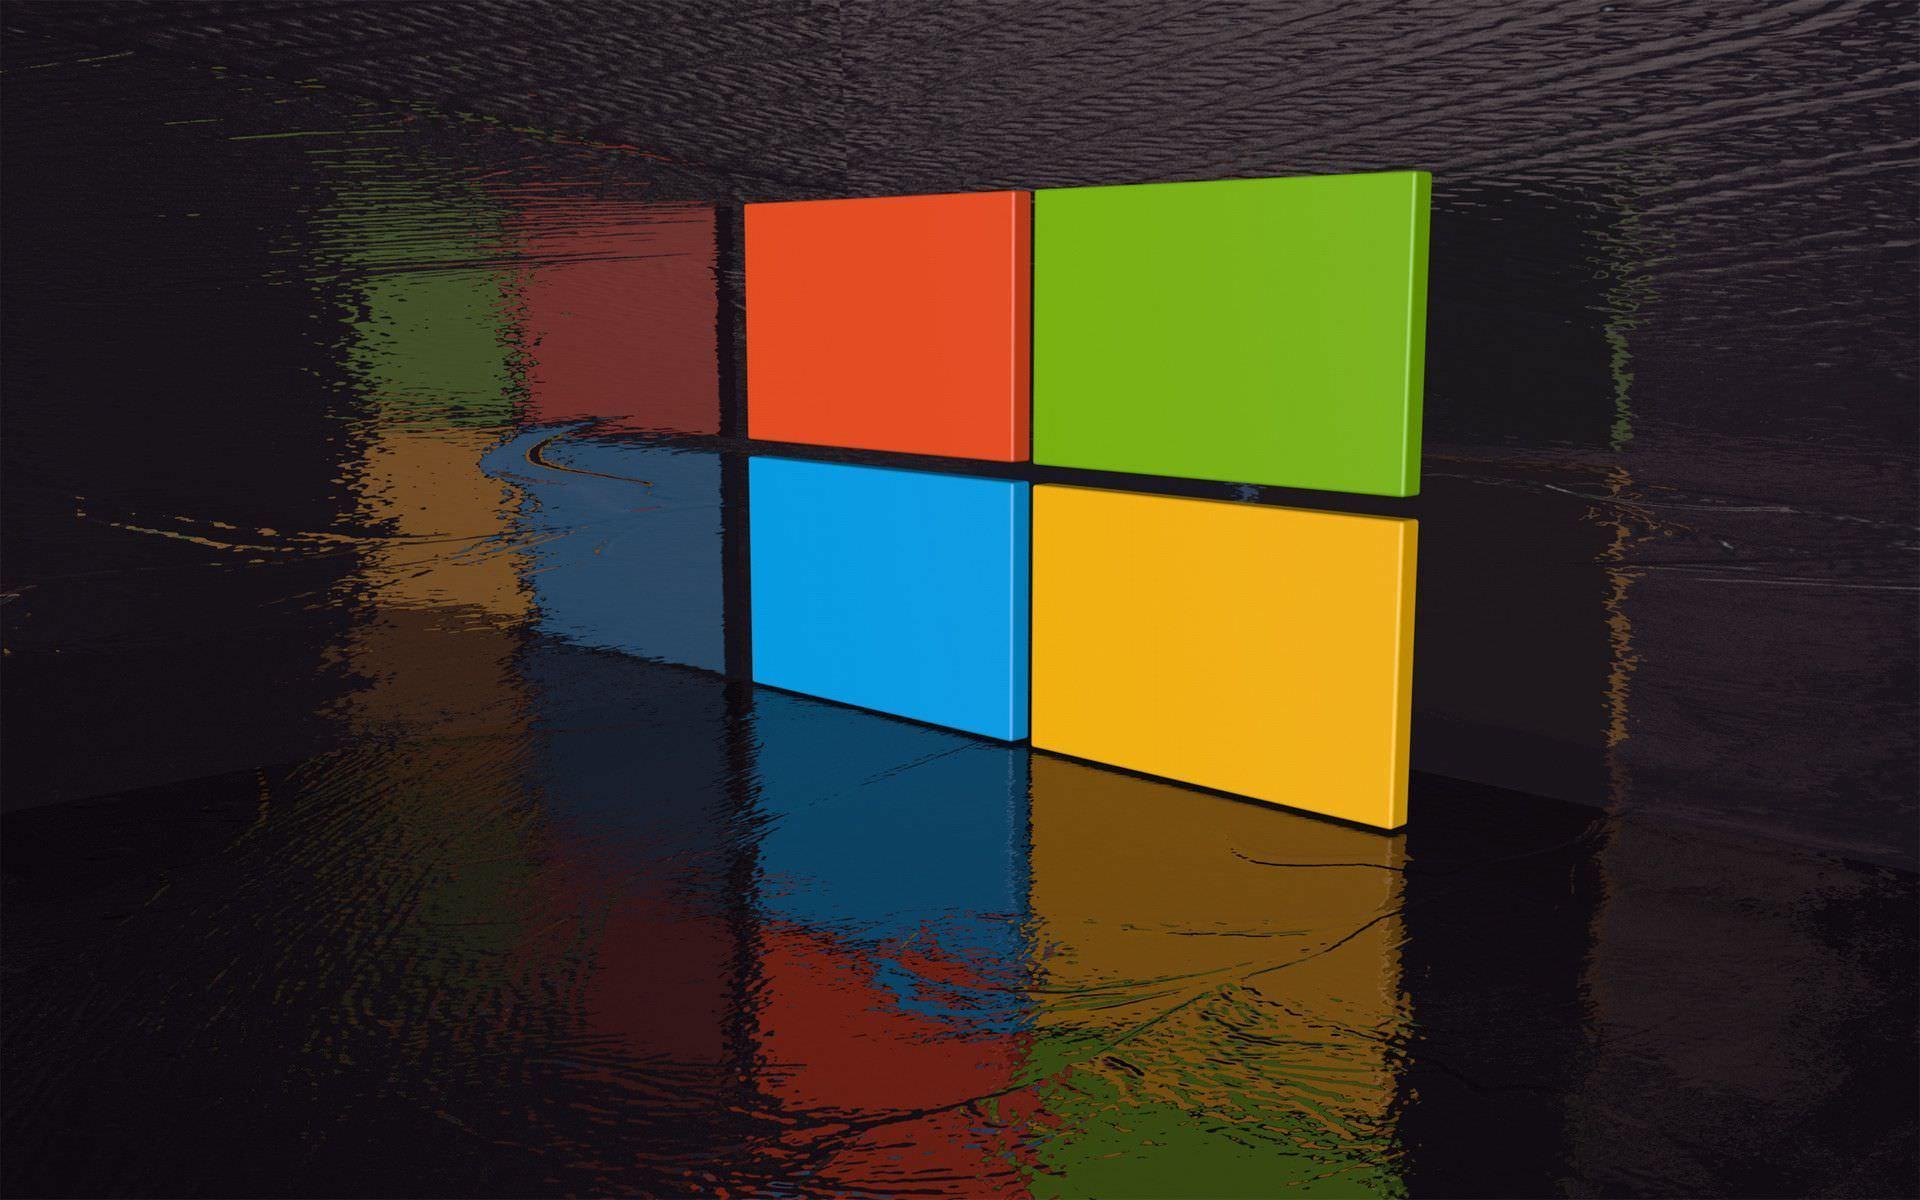 Simple Window 8 Logo - 30+ 3D Windows 8 Wallpapers, Images, Backgrounds, Pictures | Design ...